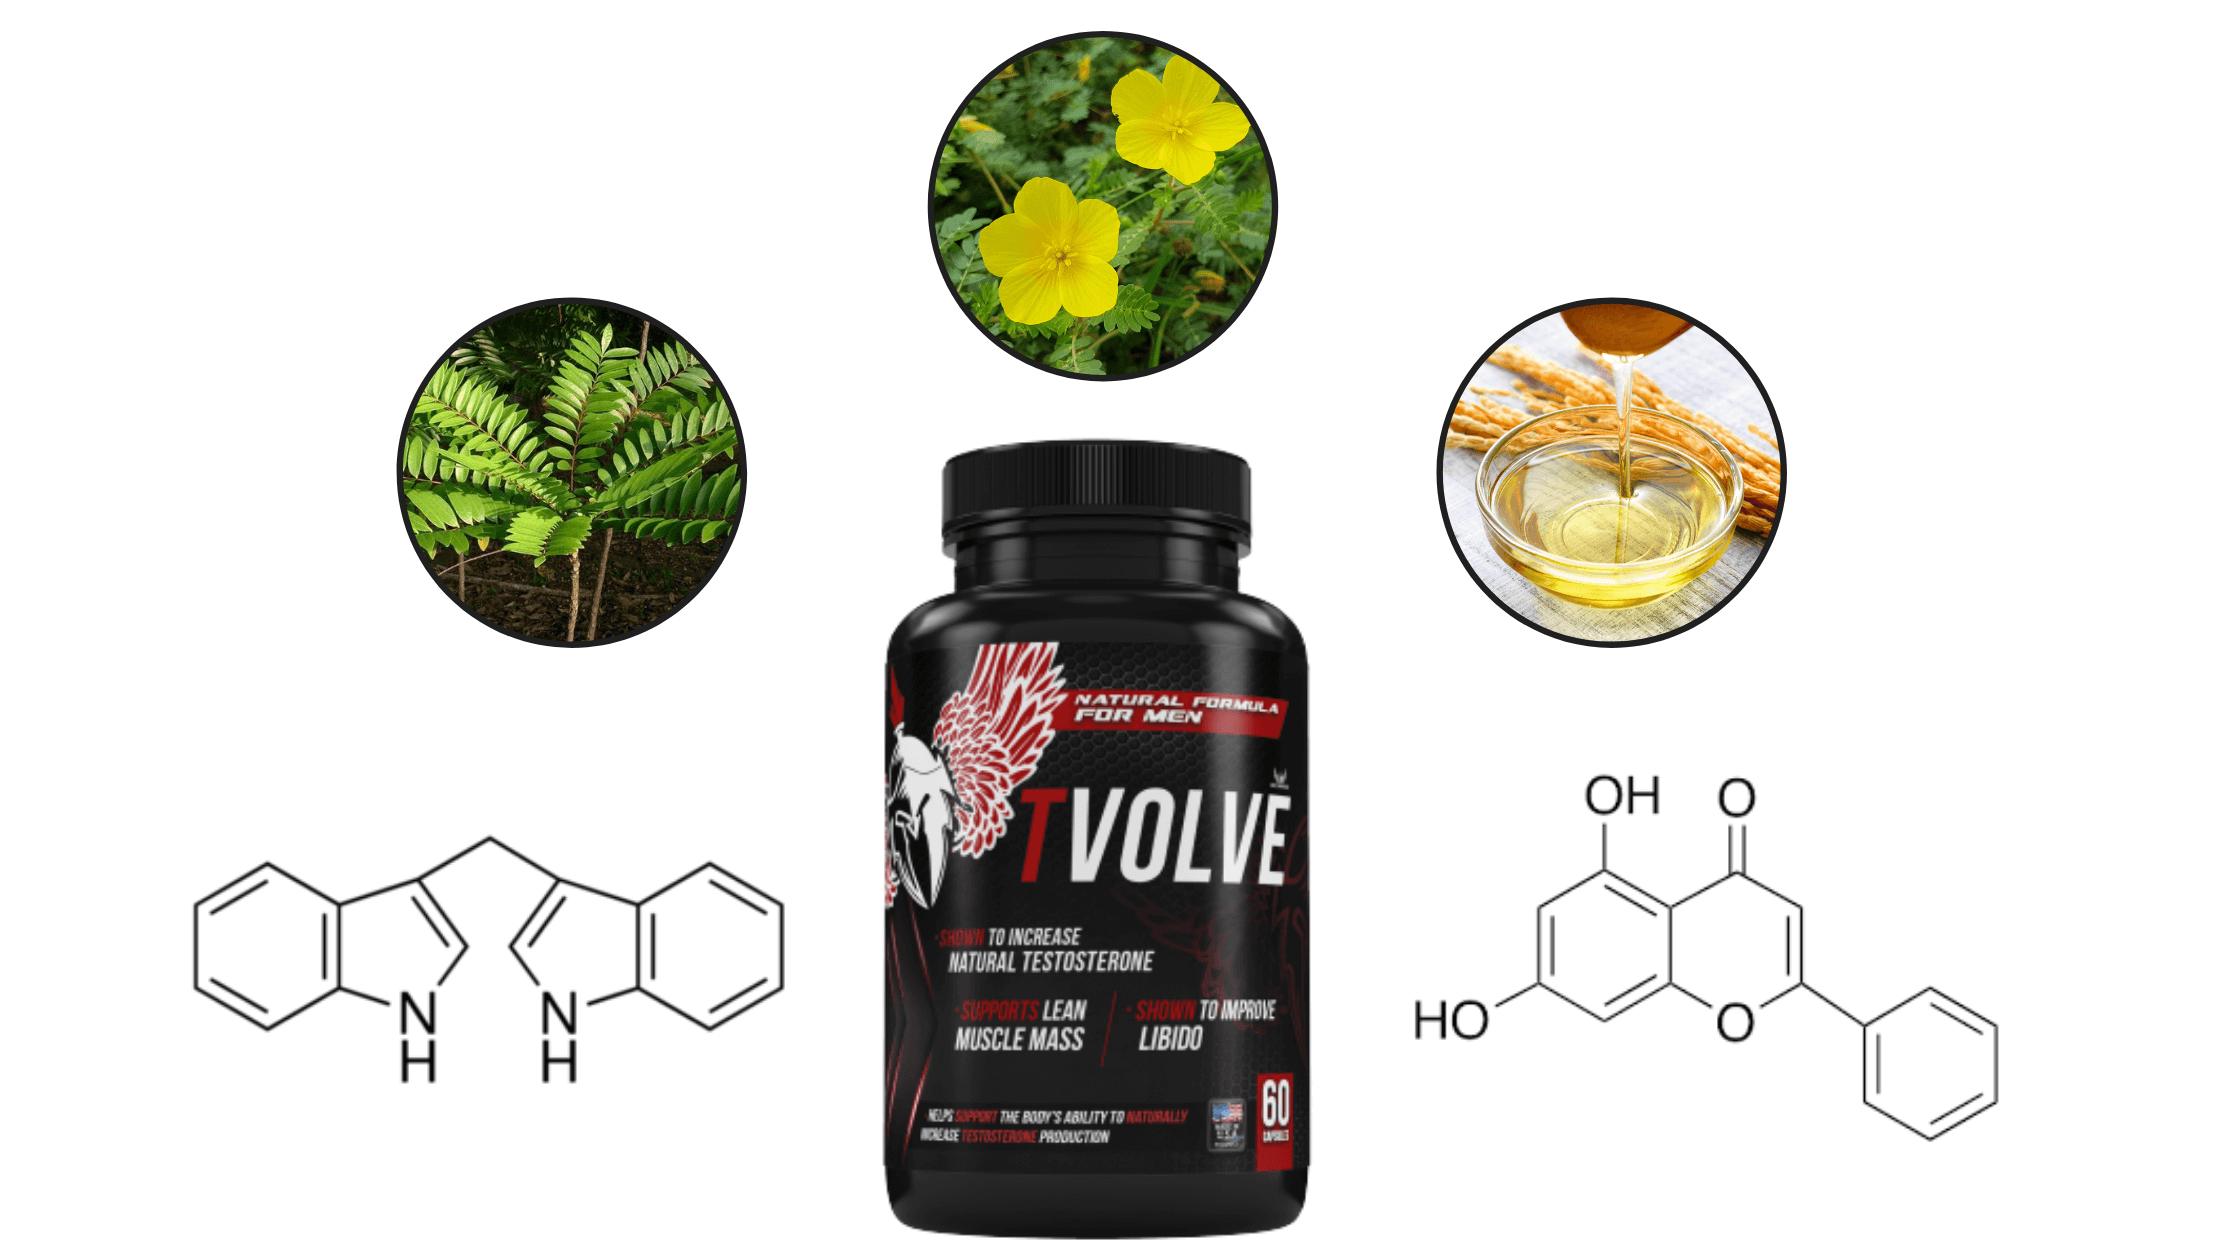 TVolve GT5 Muscle Complex Ingredients